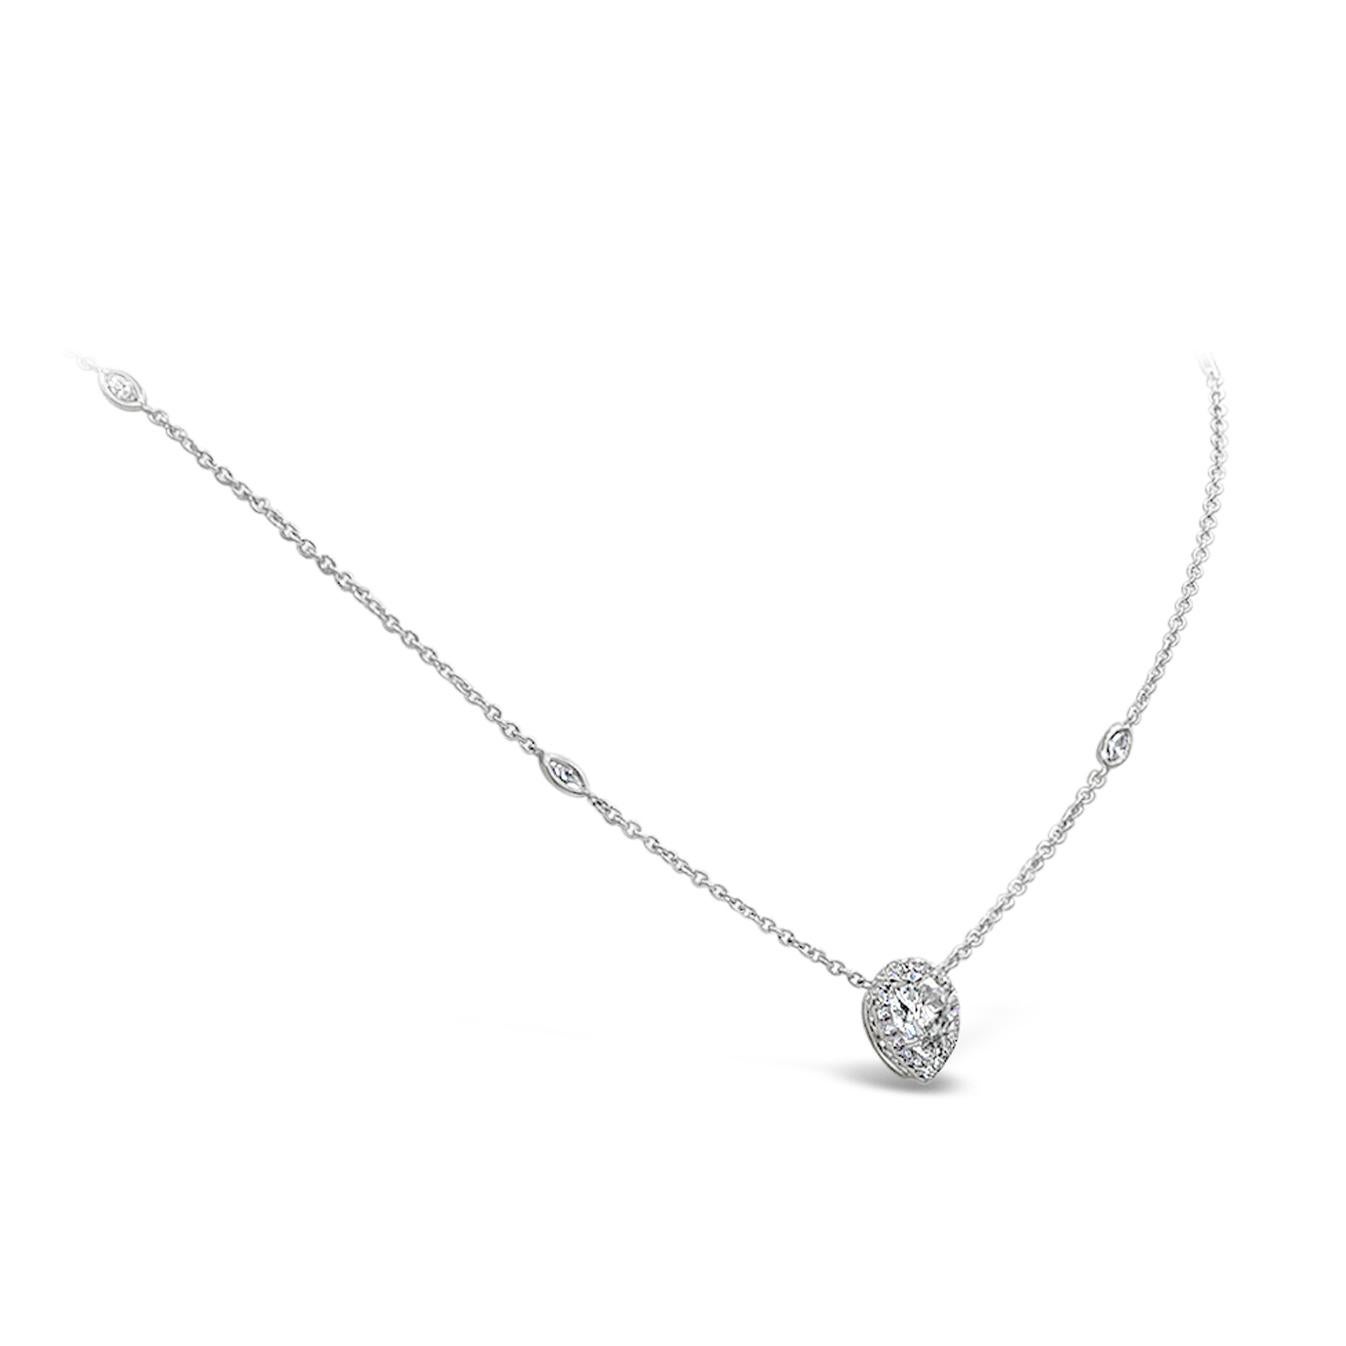 Features a 1.02 carats GIA certified as F color and SI2 in clarity, pear shape diamond set in a brilliant diamond halo. The pendant is suspended on a chic 16 inch diamonds by the yard chain. Accent diamonds weigh  0.52 carats total. Made in 18K